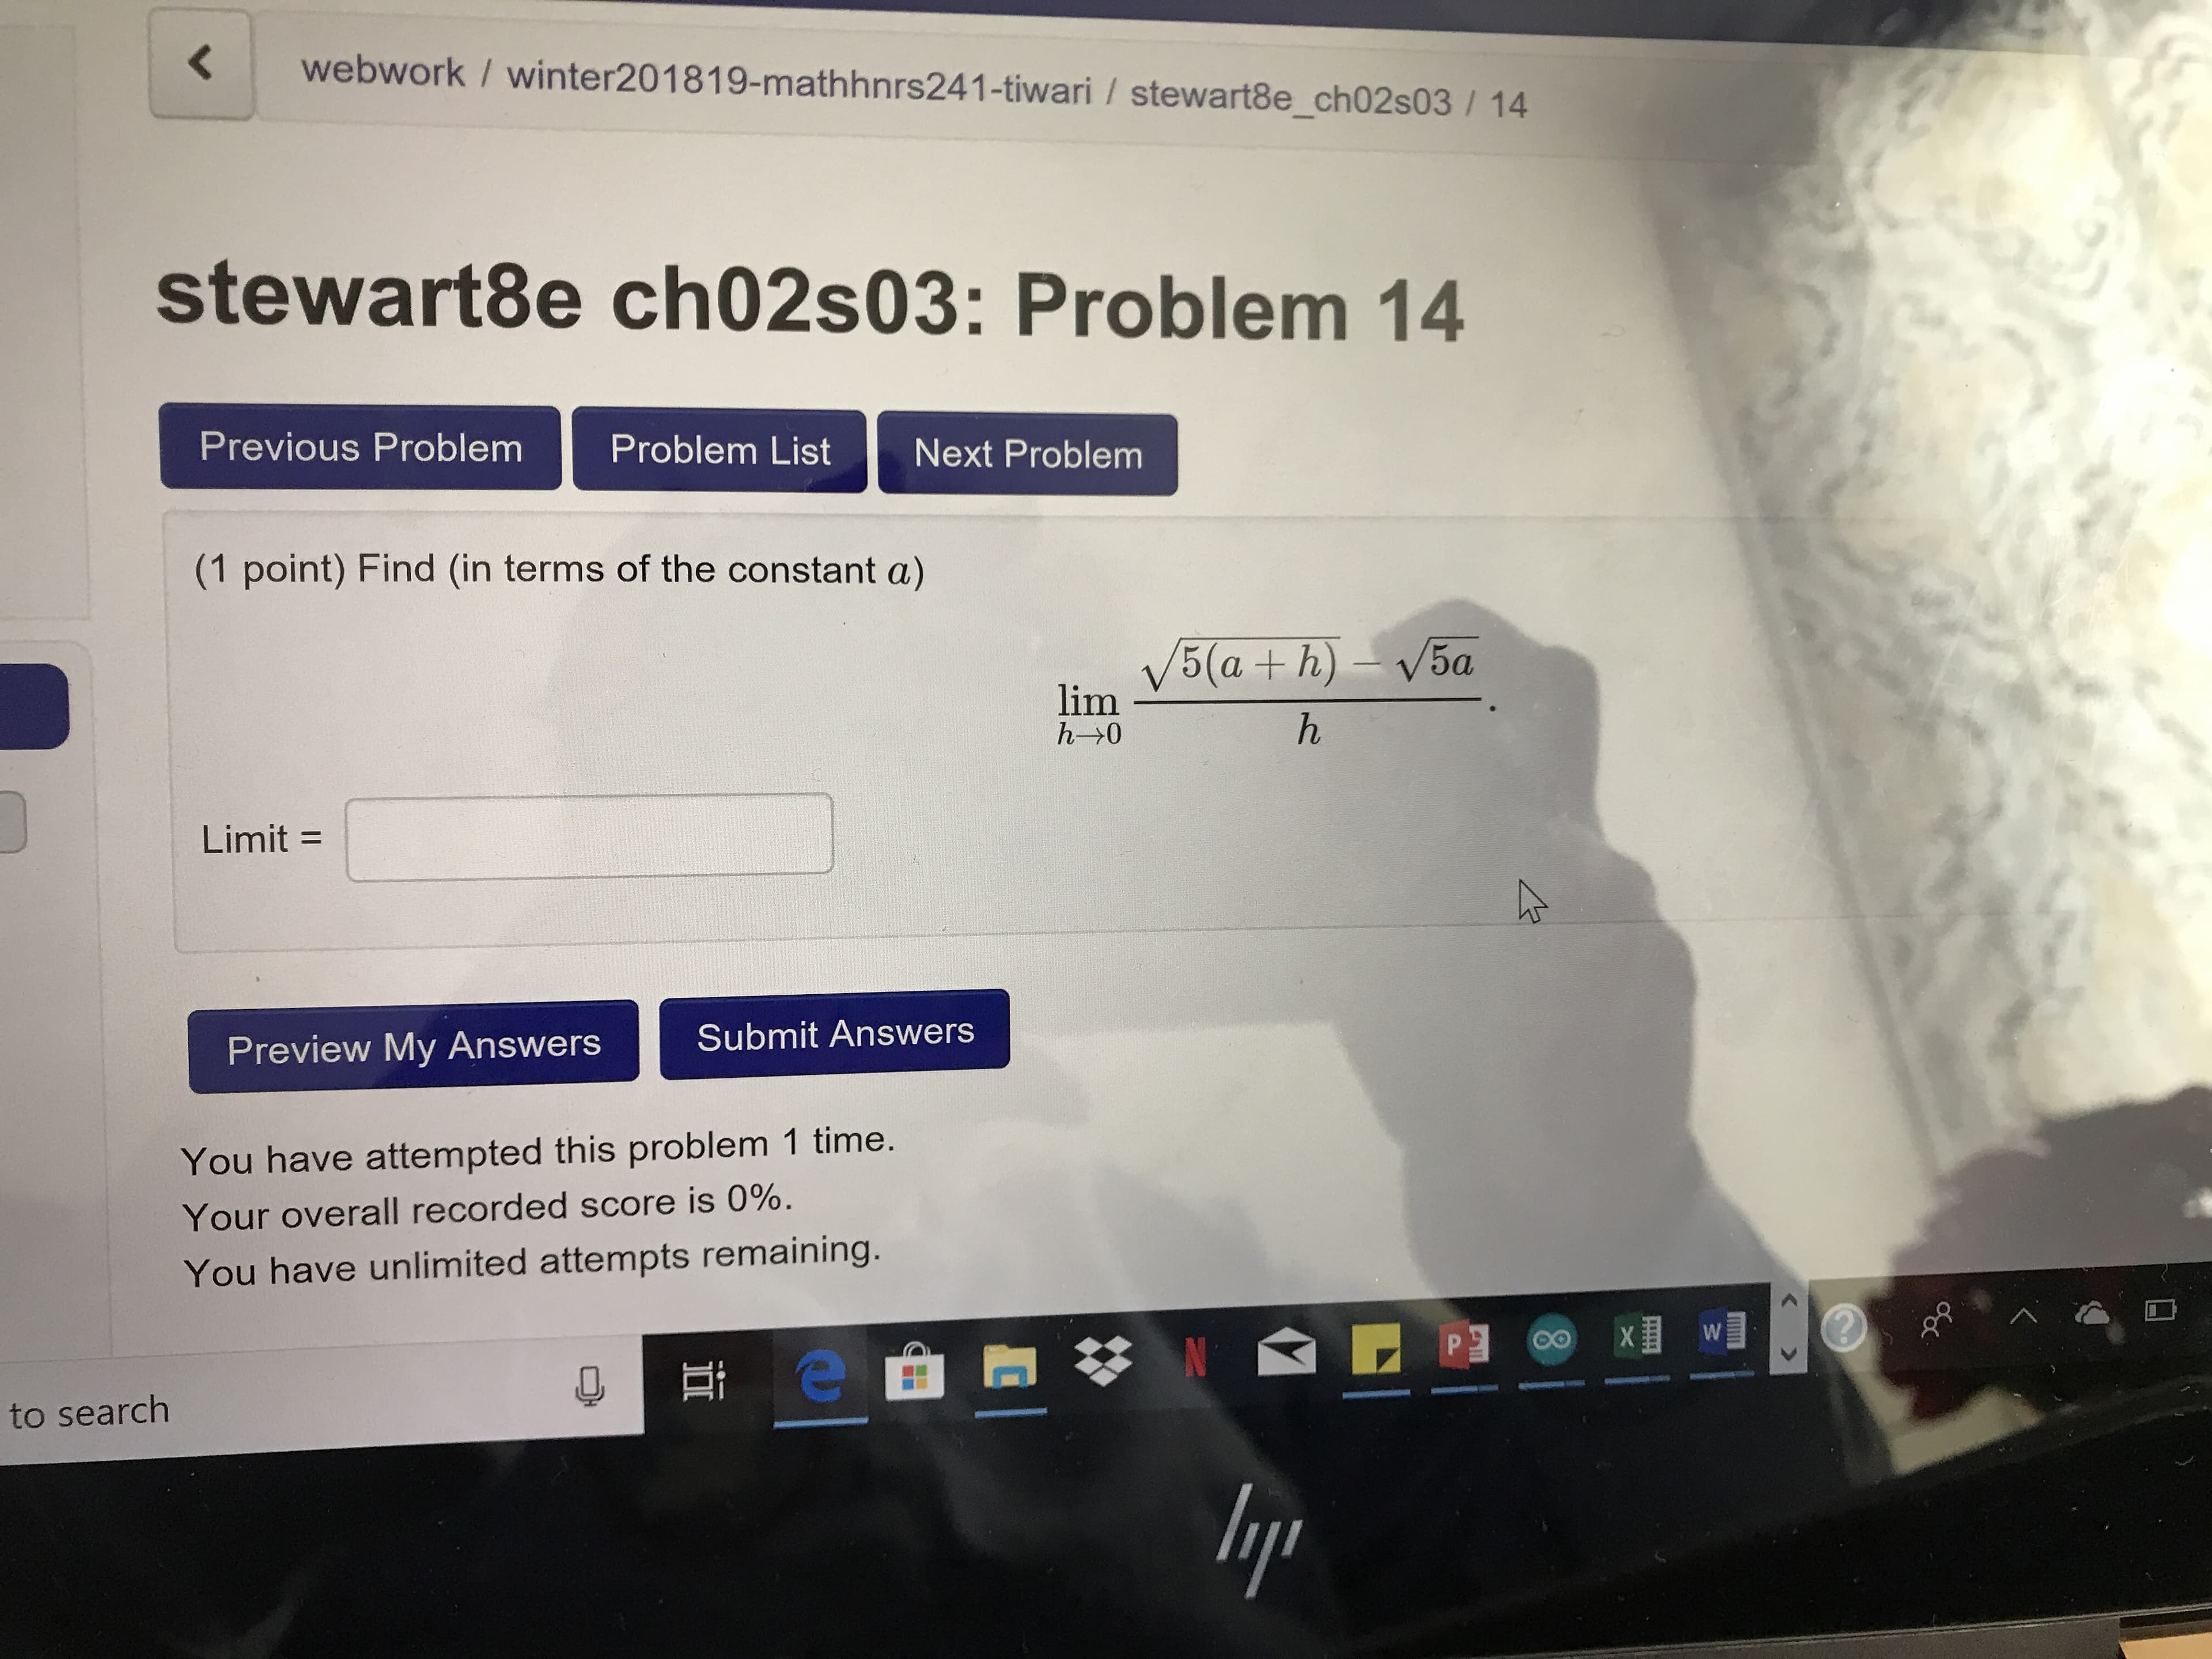 webwork / winter201819-mathhnrs241-tiwari / stewart8e_ch02s03/ 14
stewart8e ch02s03: Problem 14
Previous Problem Problem List Next Problem
(1 point) Find (in terms of the constant a)
lim
Limit
Preview My Answers Submit Answers
You have attempted this problem 1 time.
Your overall recorded score is 0%.
You have unlimited attempts remaining
oo X
to search
